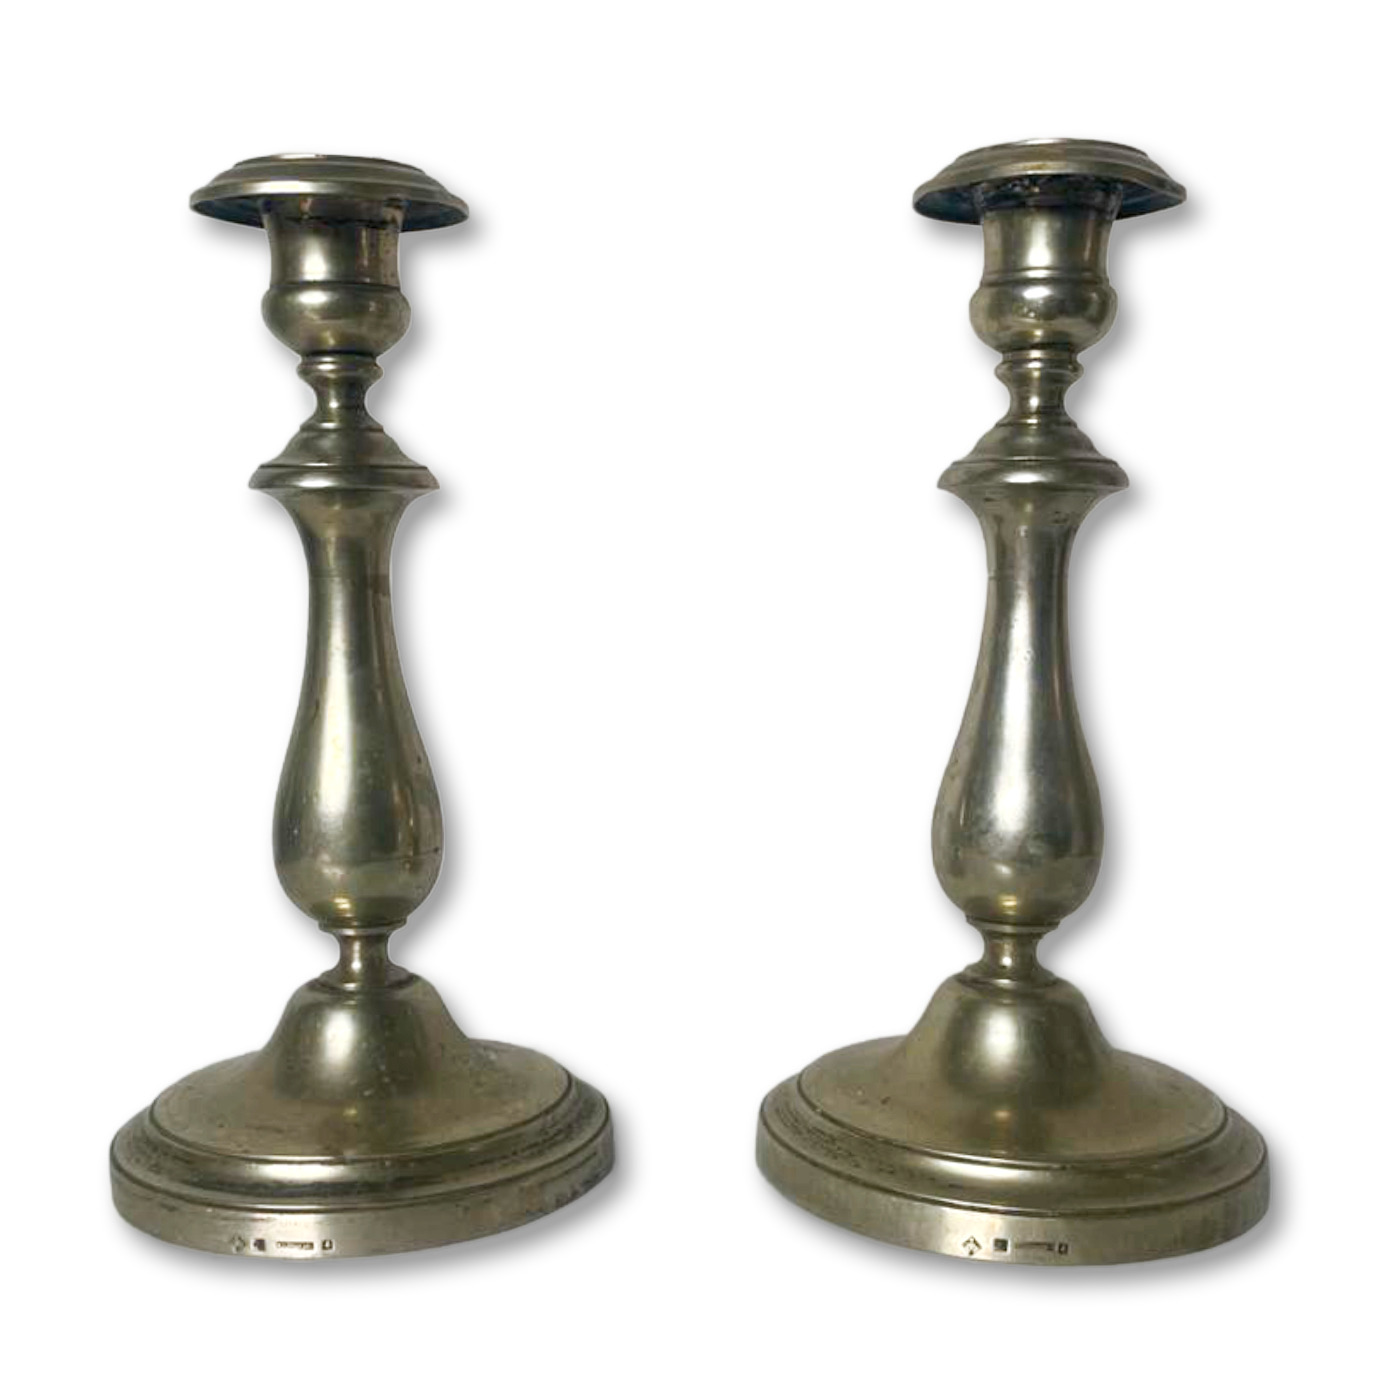 Pair of Christofle French Candle Holders from Silver-Candlesticks Made in France